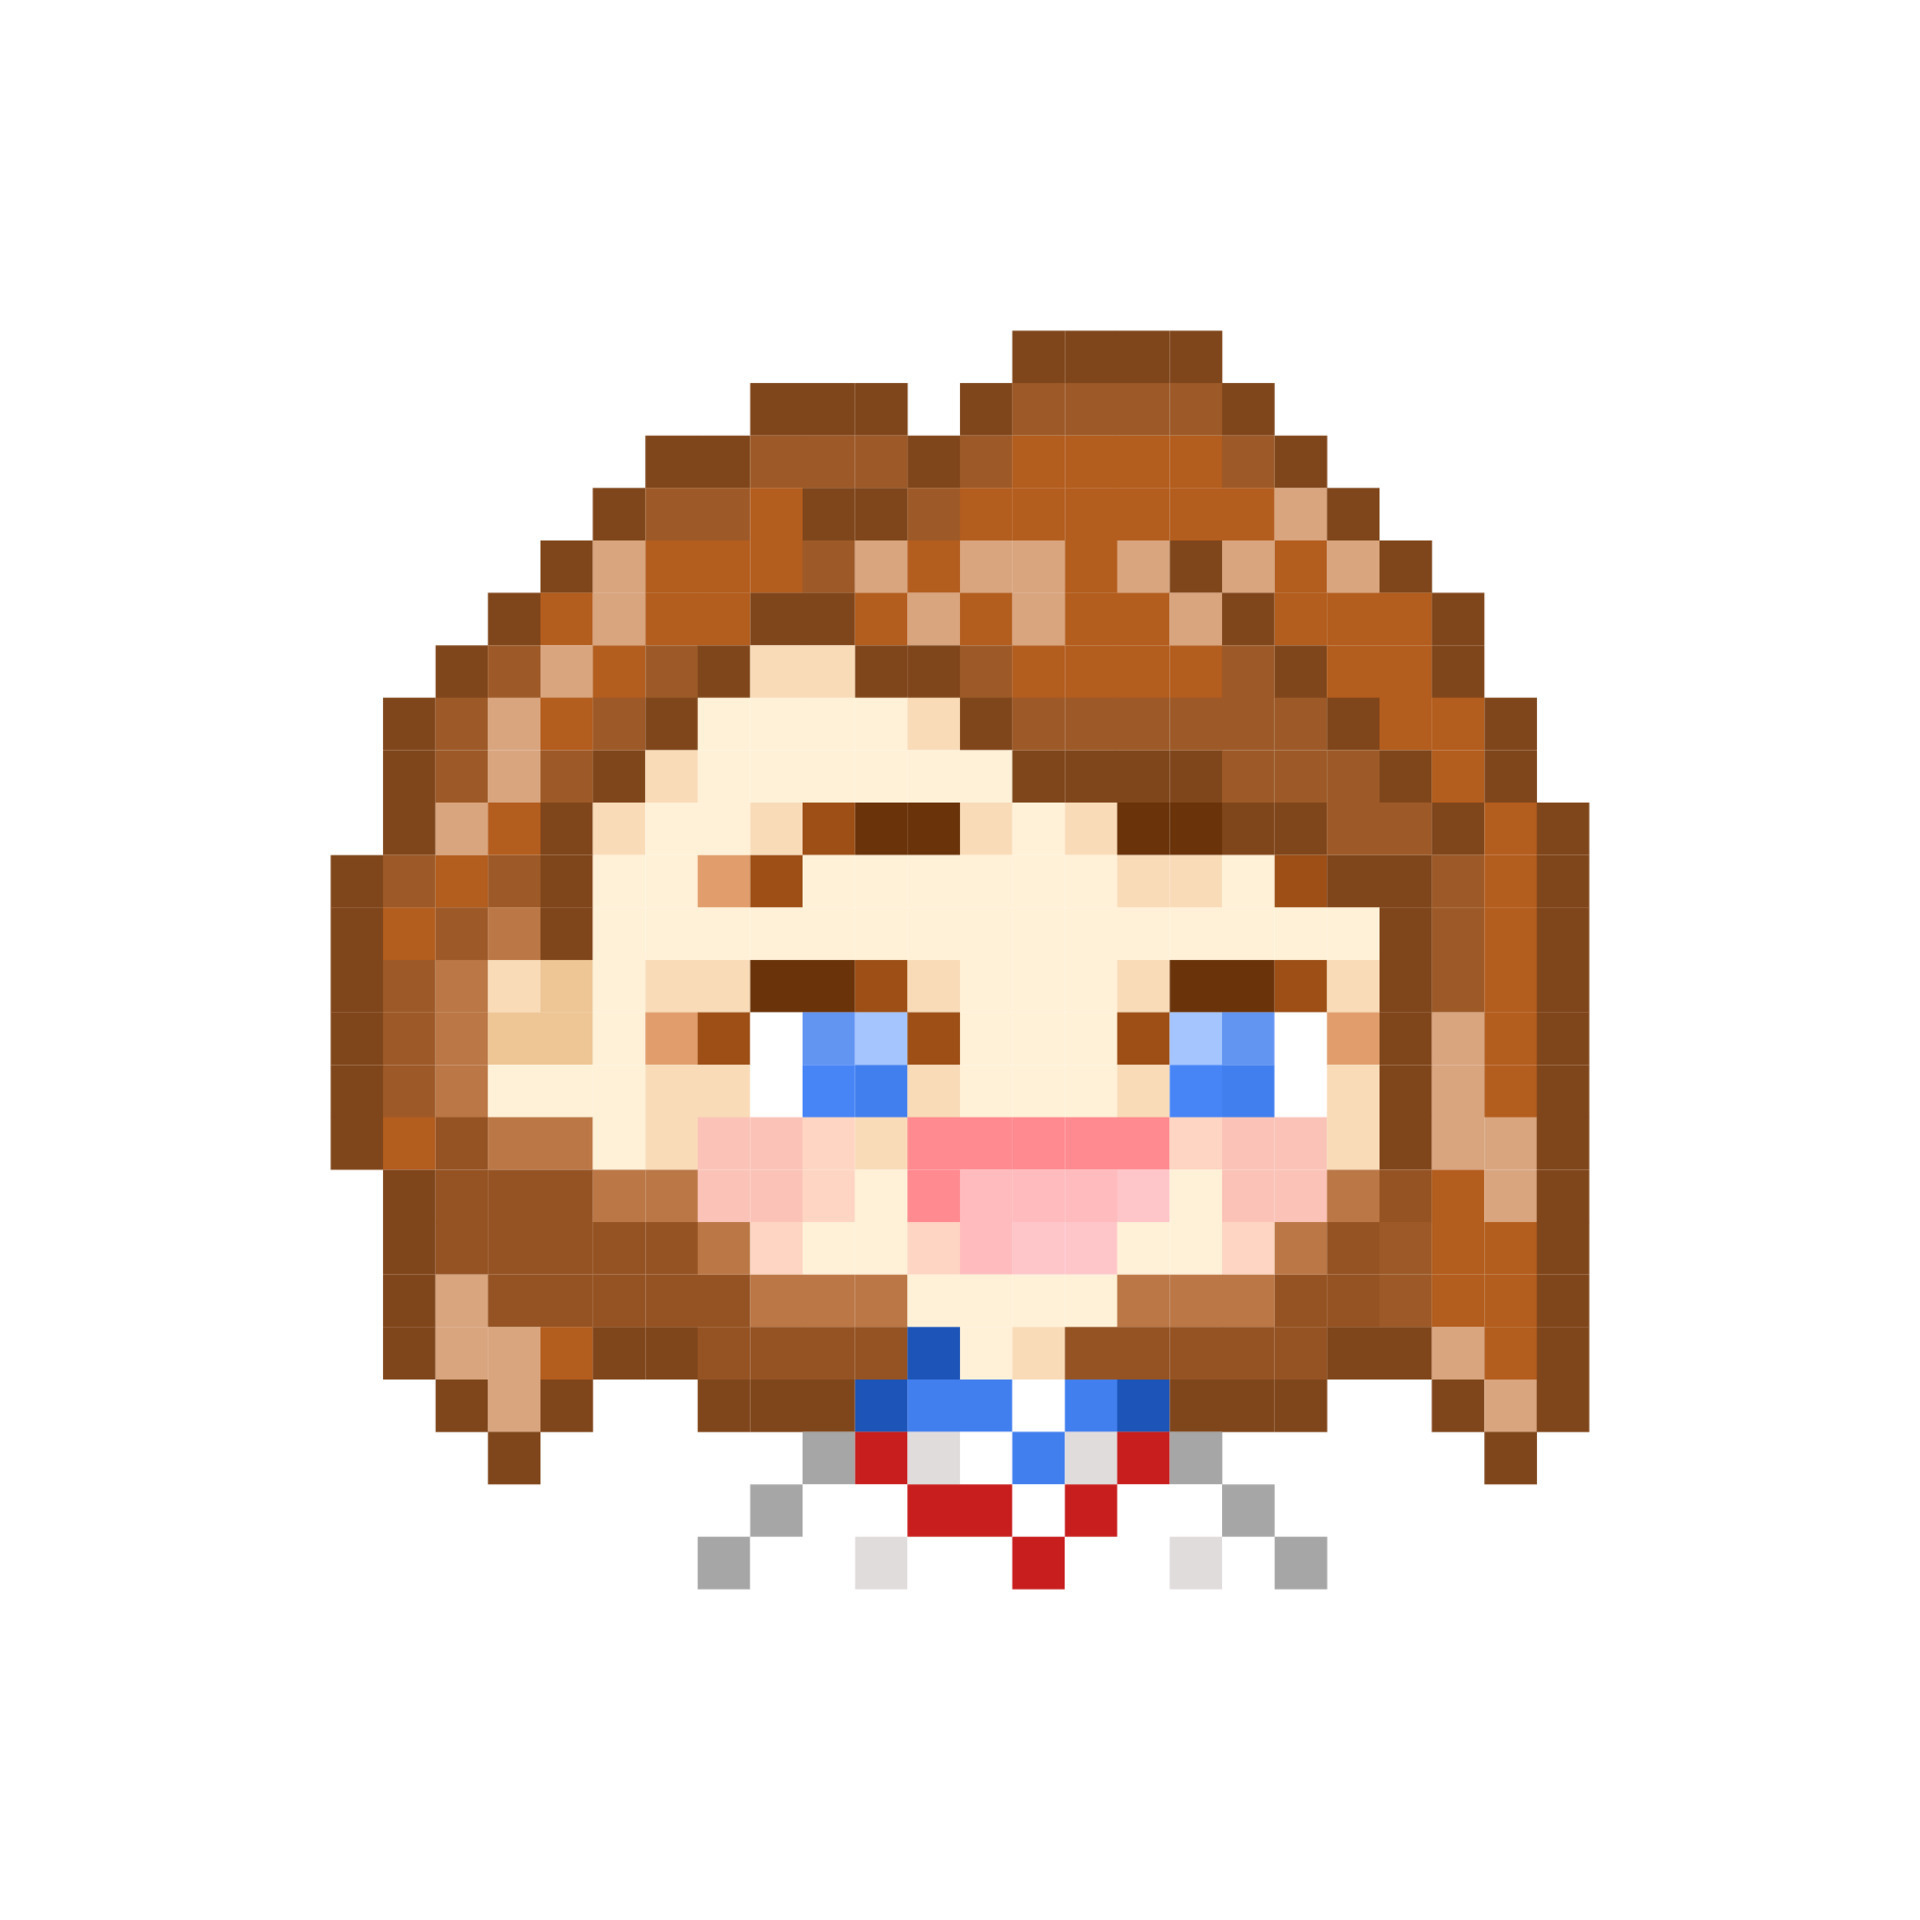 pixel art style, old videogames style, retro style 18 bit, chibi high  school girl emote LOL for discord or twitch 11185414 Vector Art at Vecteezy